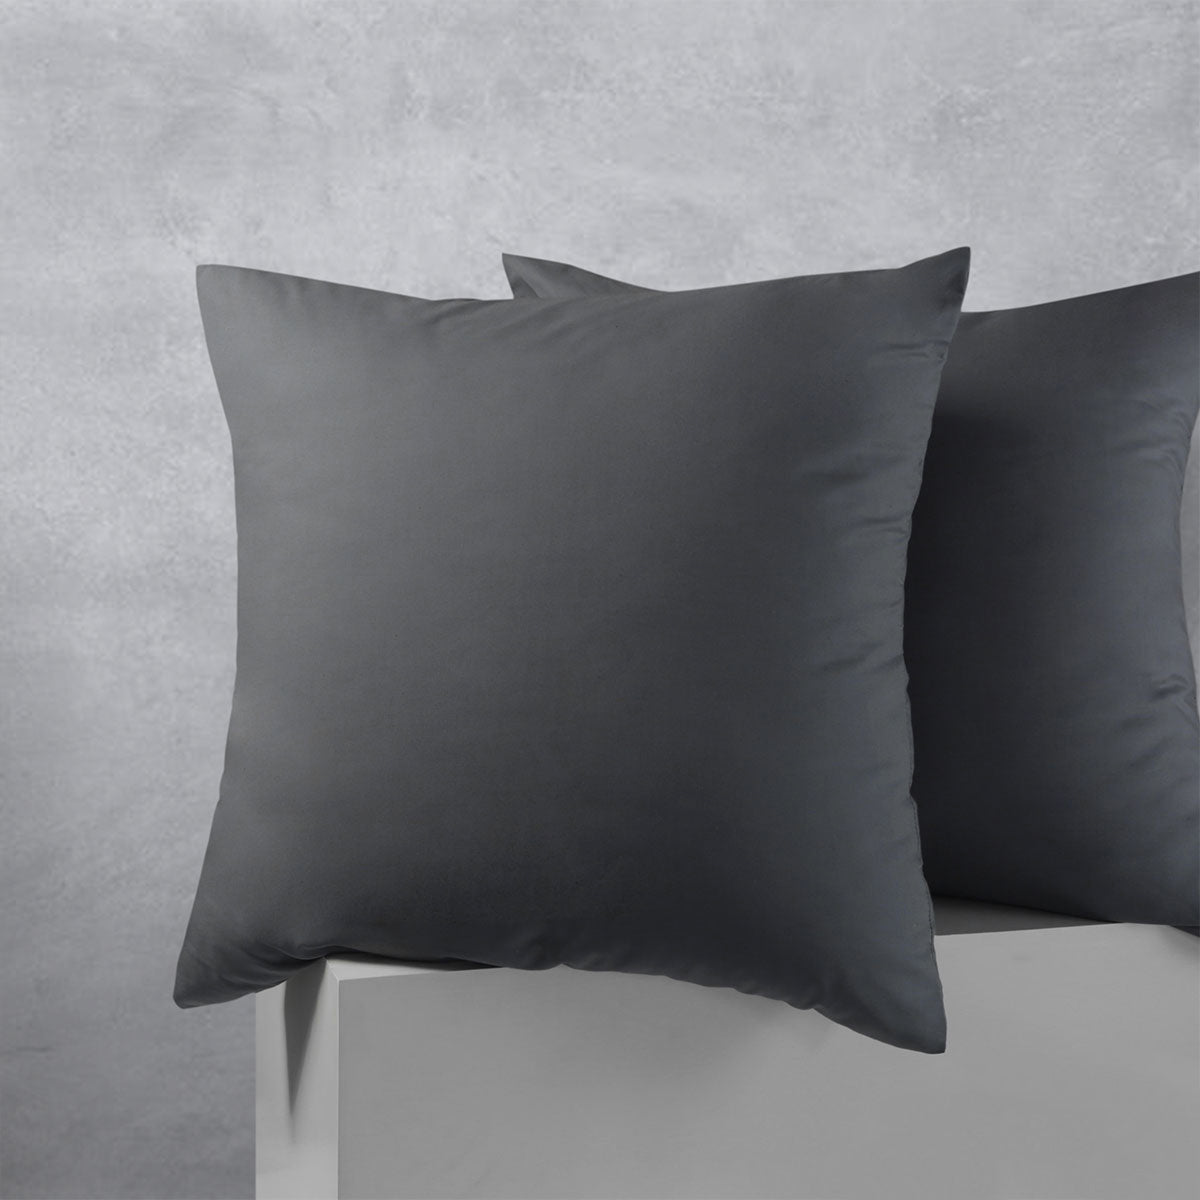 Accessorize Pair of Cotton Polyester European Pillowcases Charcoal